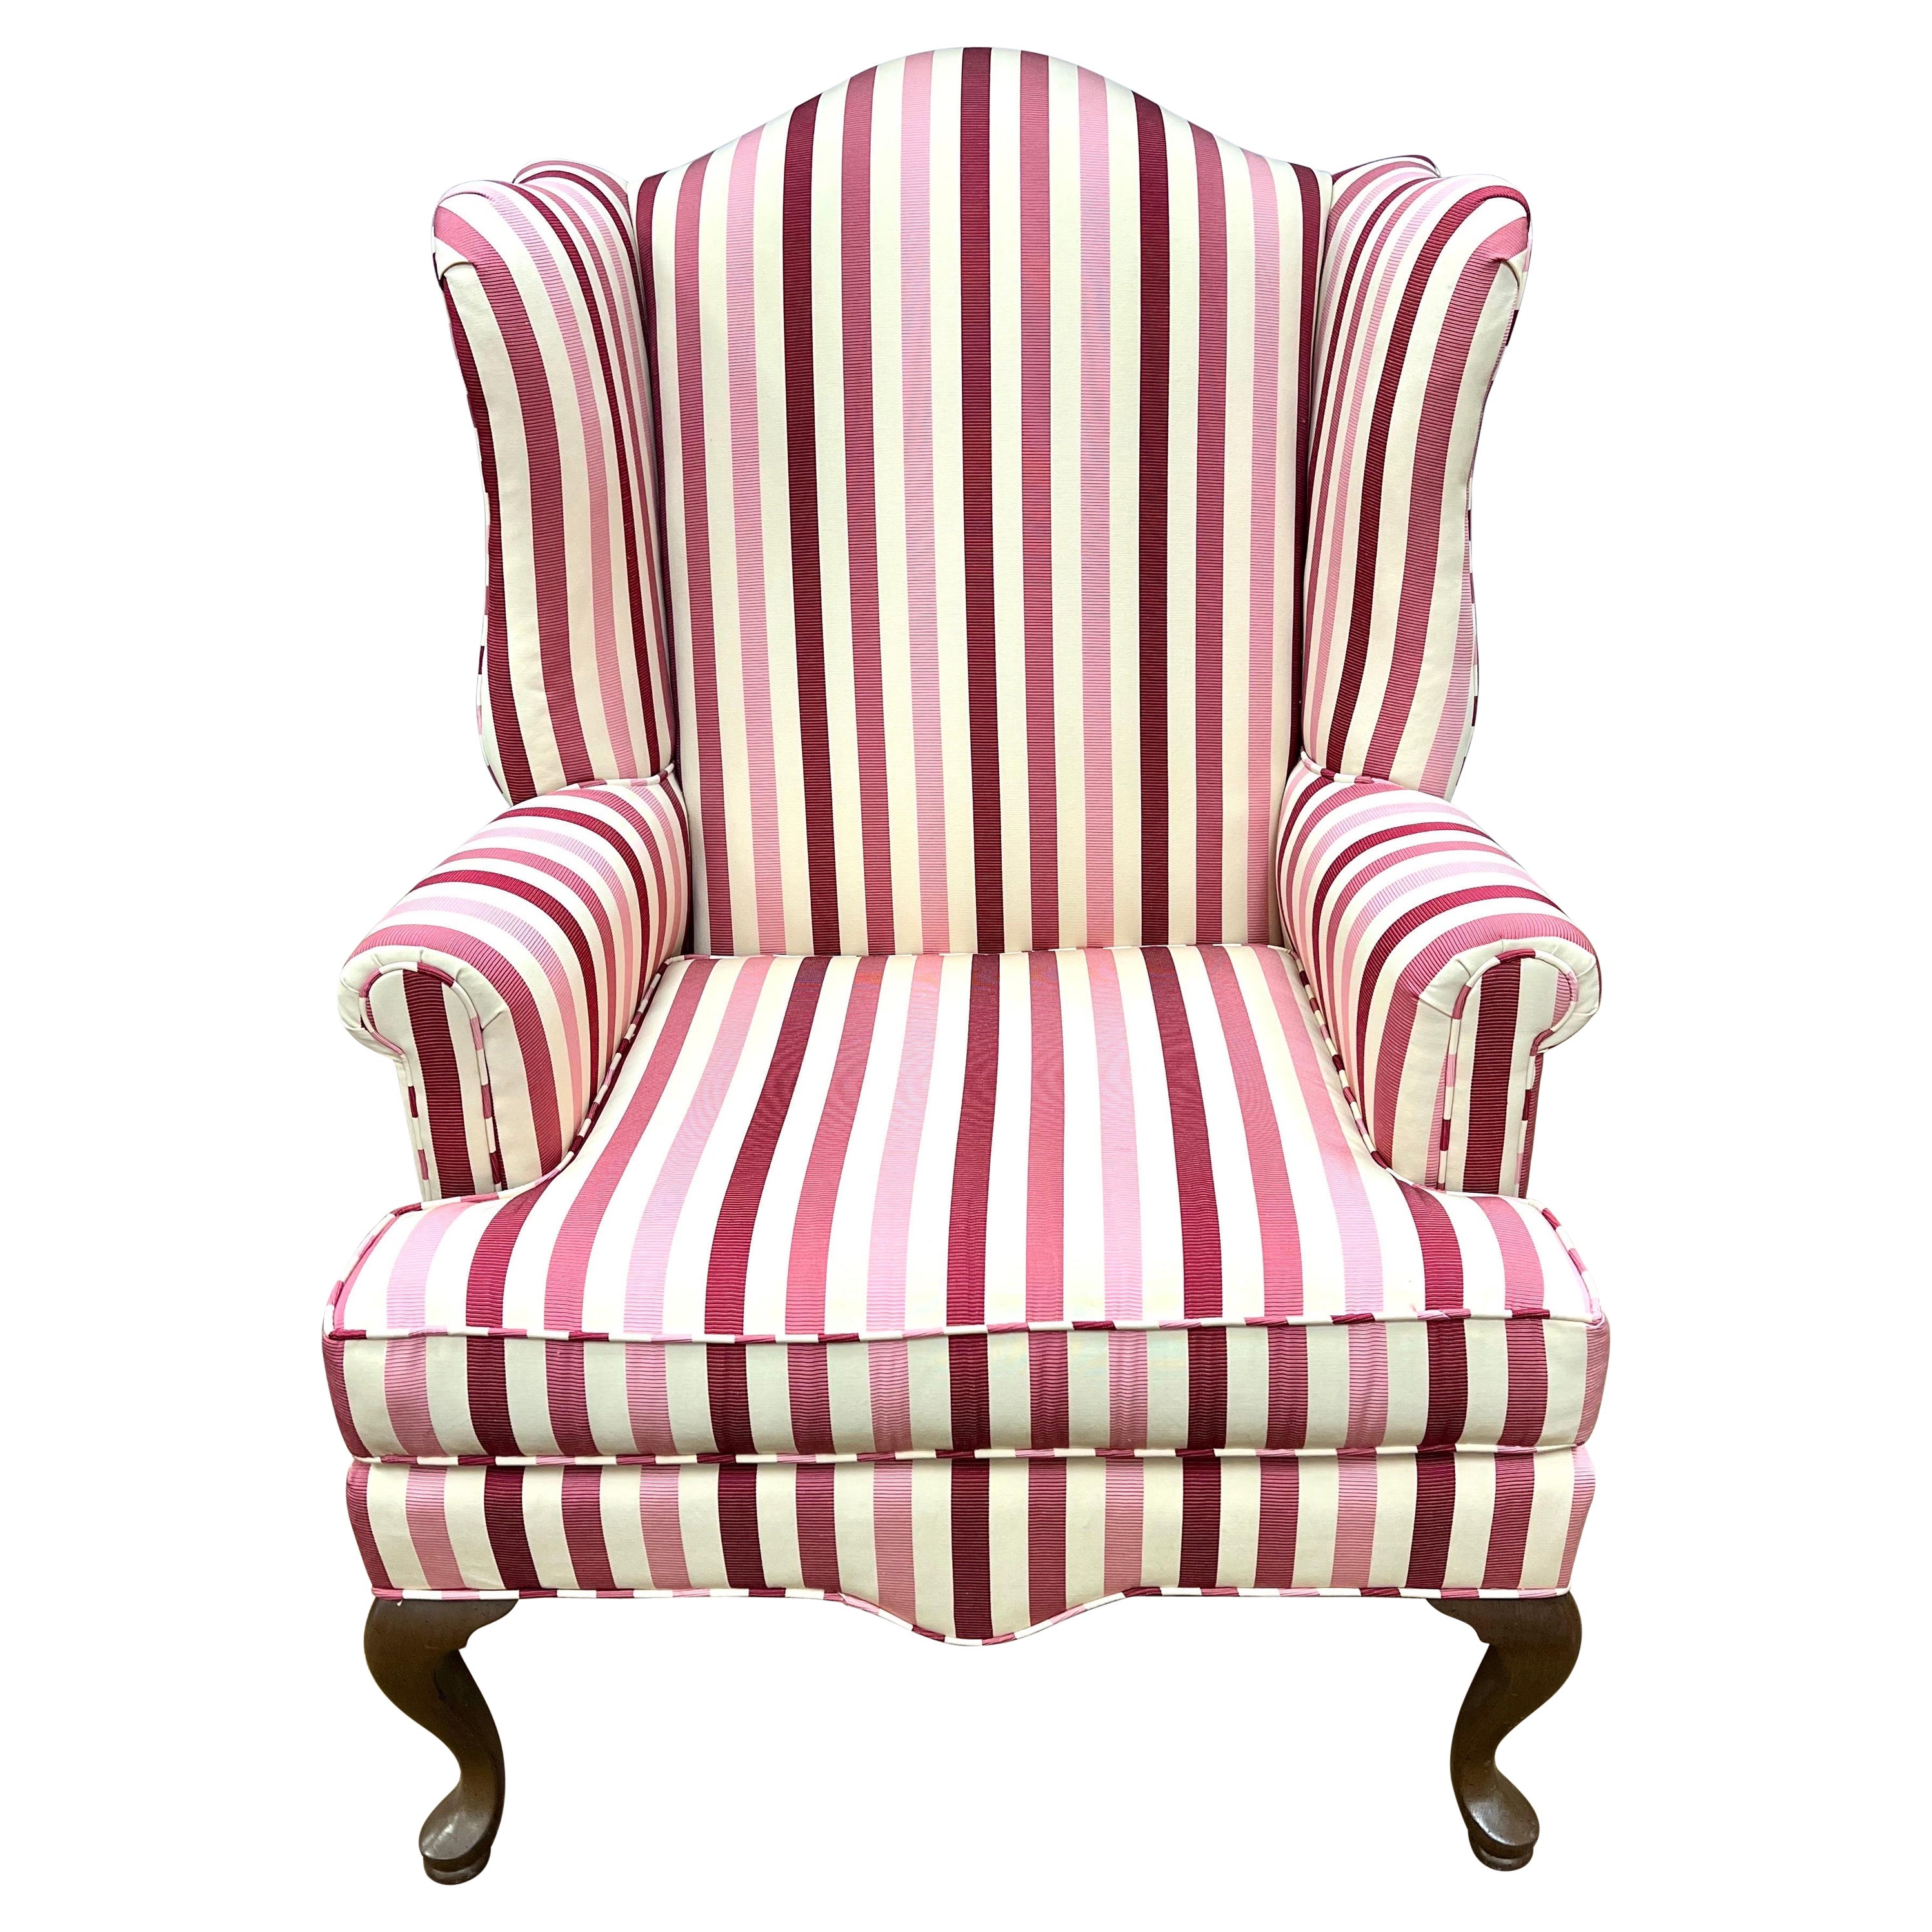 Classic Custom Wingback Chair with New Pink Striped Upholstery